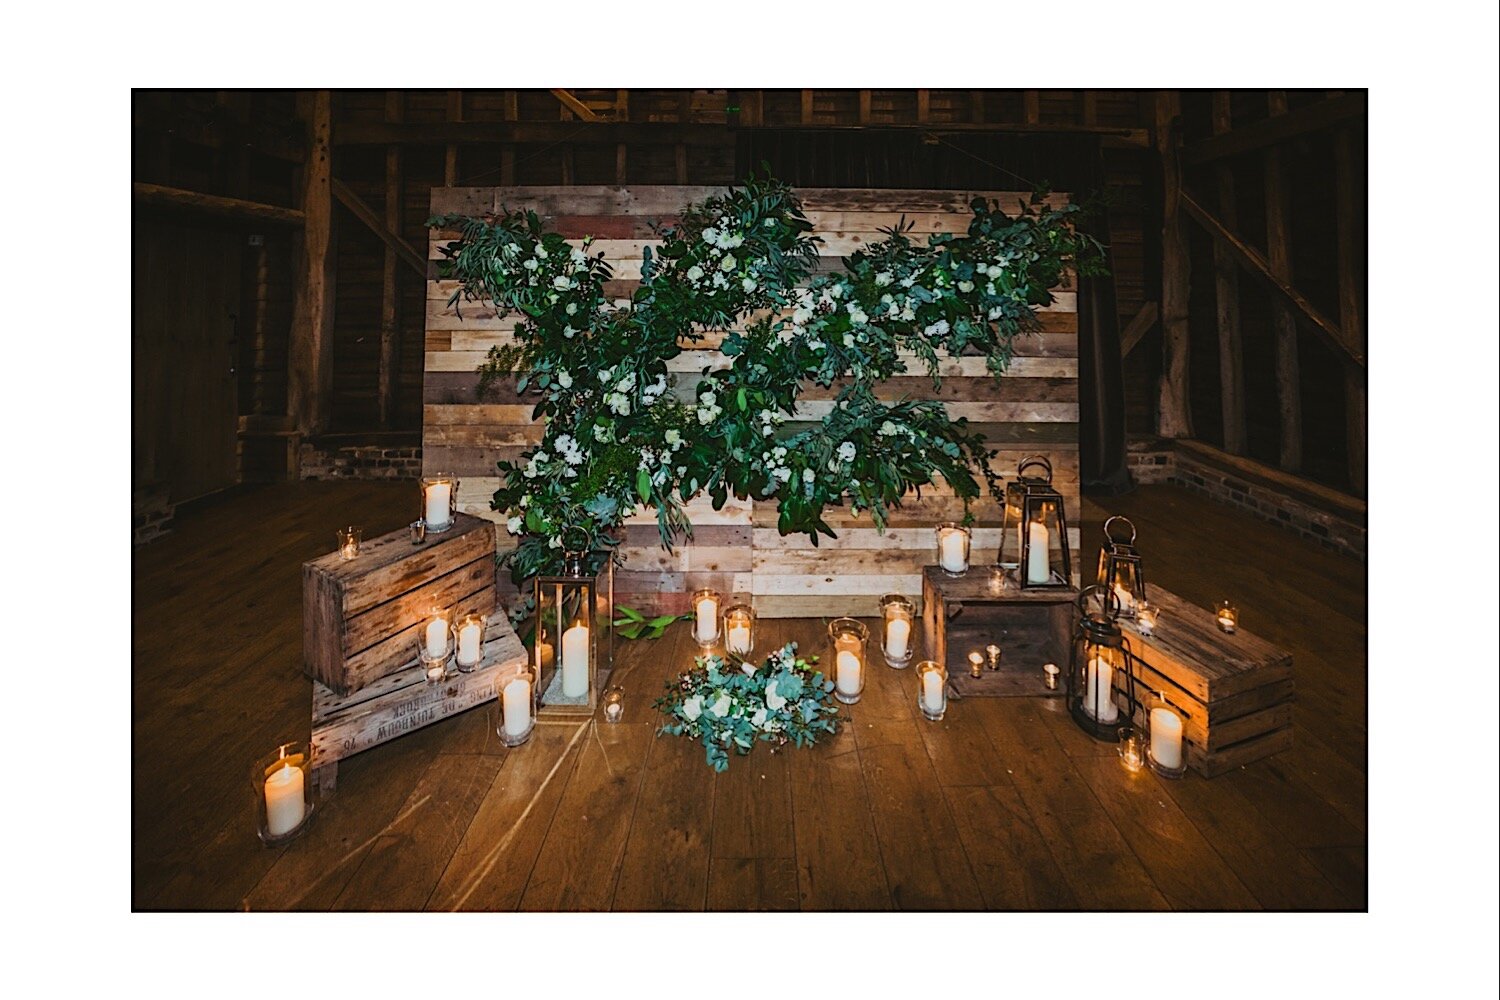 079_TWS-915c_place_names_style_hertfordshire_up_breakfast_historic_winter_flowers_set_farmhouse_barn_banquet_festive_redcoats_settings_photography_herts_bride_venue_wedding_ceremony_room_tables_photographer_goals_groom_dinner.jpg